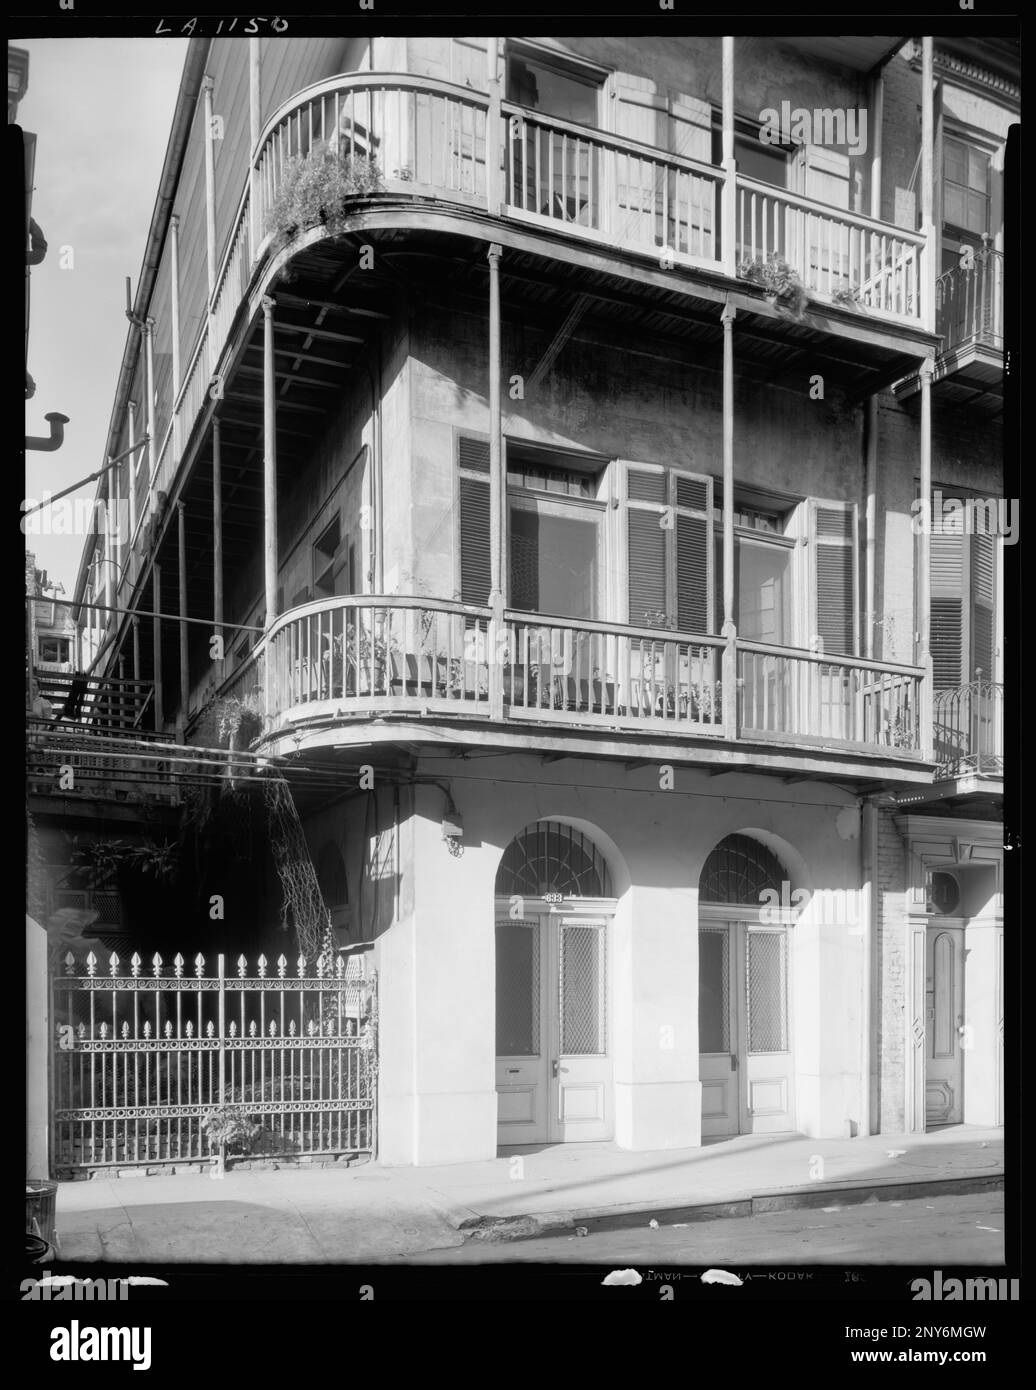 633 Toulouse St., New Orleans, Orleans Parish, Louisiana. Carnegie Survey of the Architecture of the South. United States, Louisiana, Orleans Parish, New Orleans,  Balconies,  Buildings,  Doors & doorways,  Fanlights,  Fences. Stock Photo